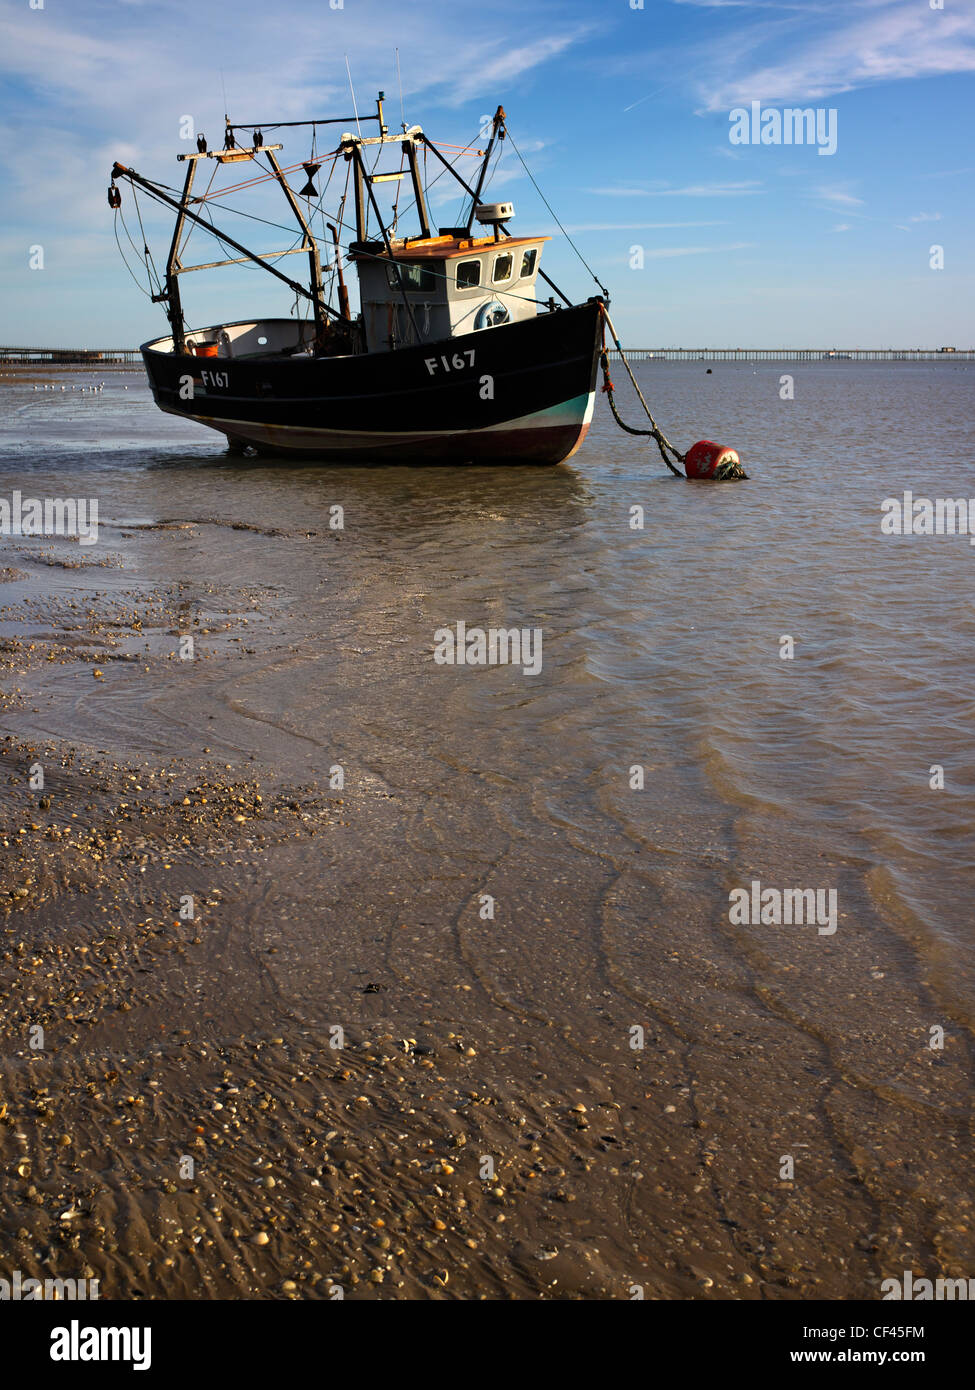 The Hornet at low tide off Southend beach. Originally the south end of the village of Prittlewell, Southend became a popular sea Stock Photo